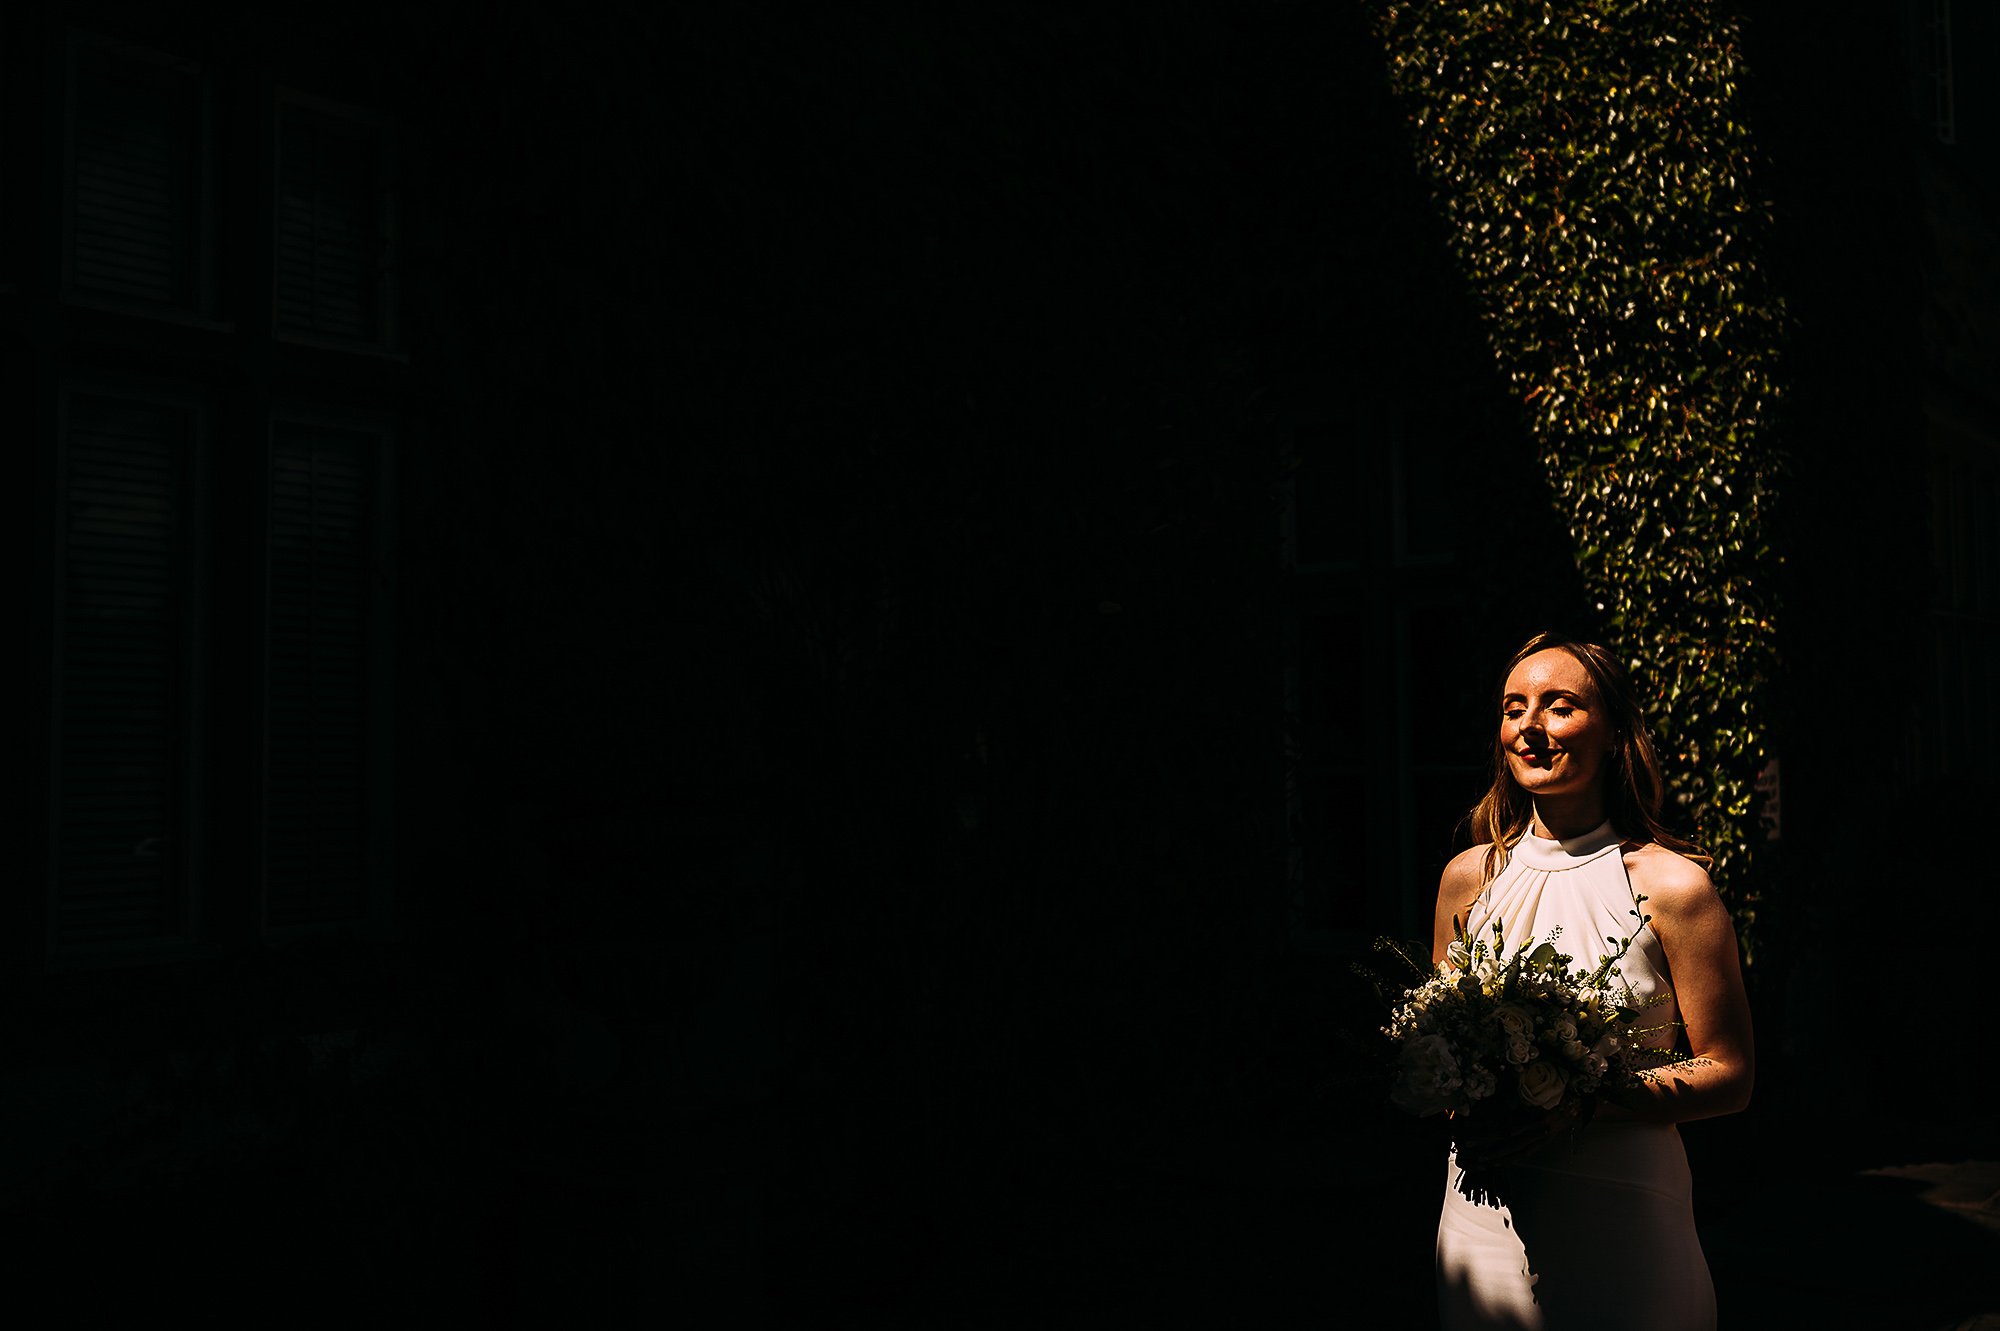  Bride in nice light about to get married. 